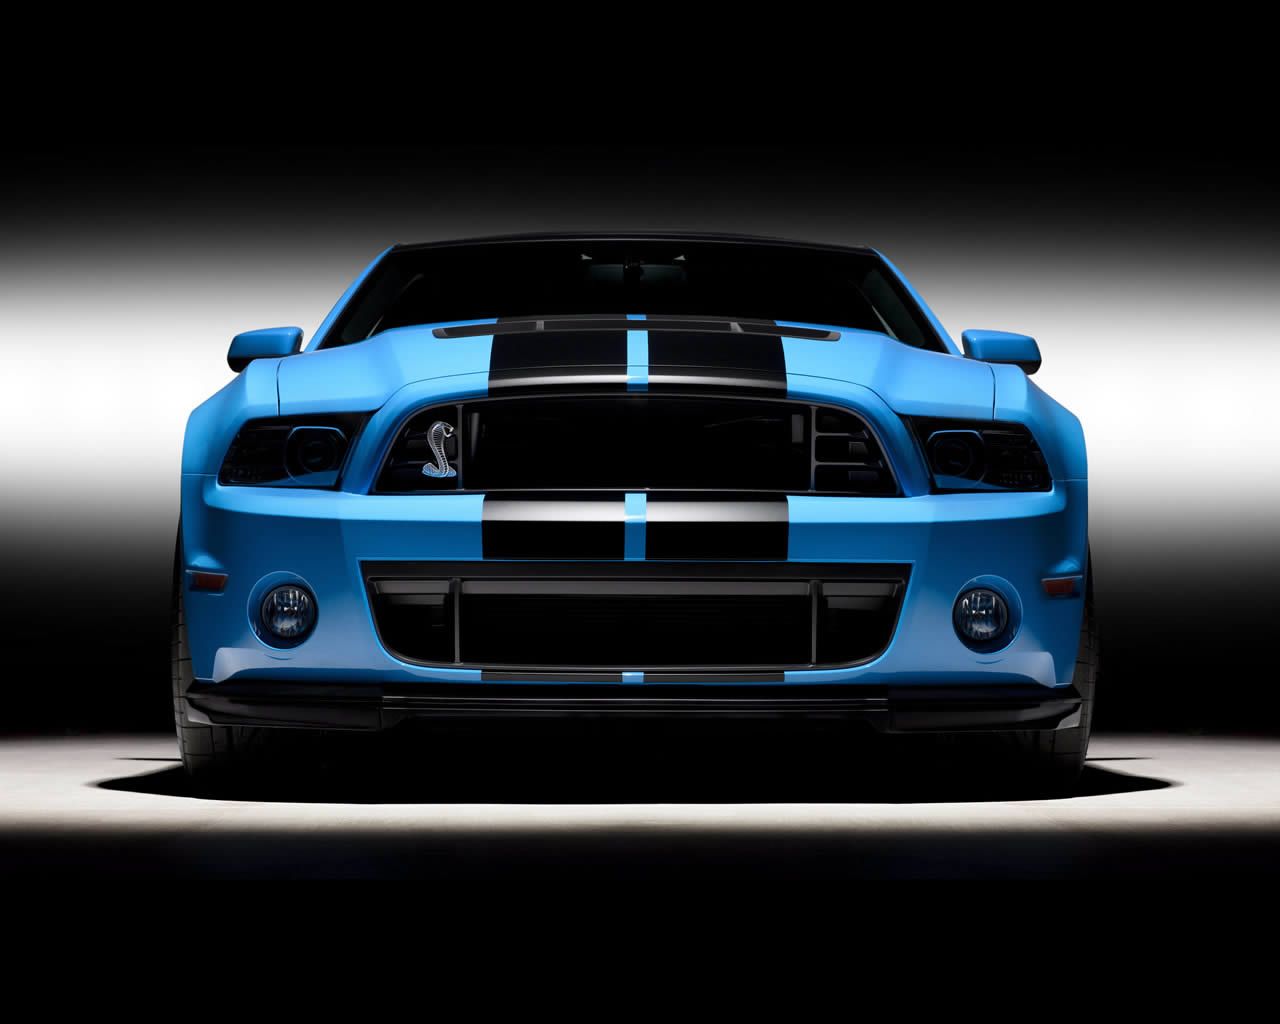 Ford Mustang Shelby Gt500 Epic HD Wallpapers | hdcarwallpapersin.com